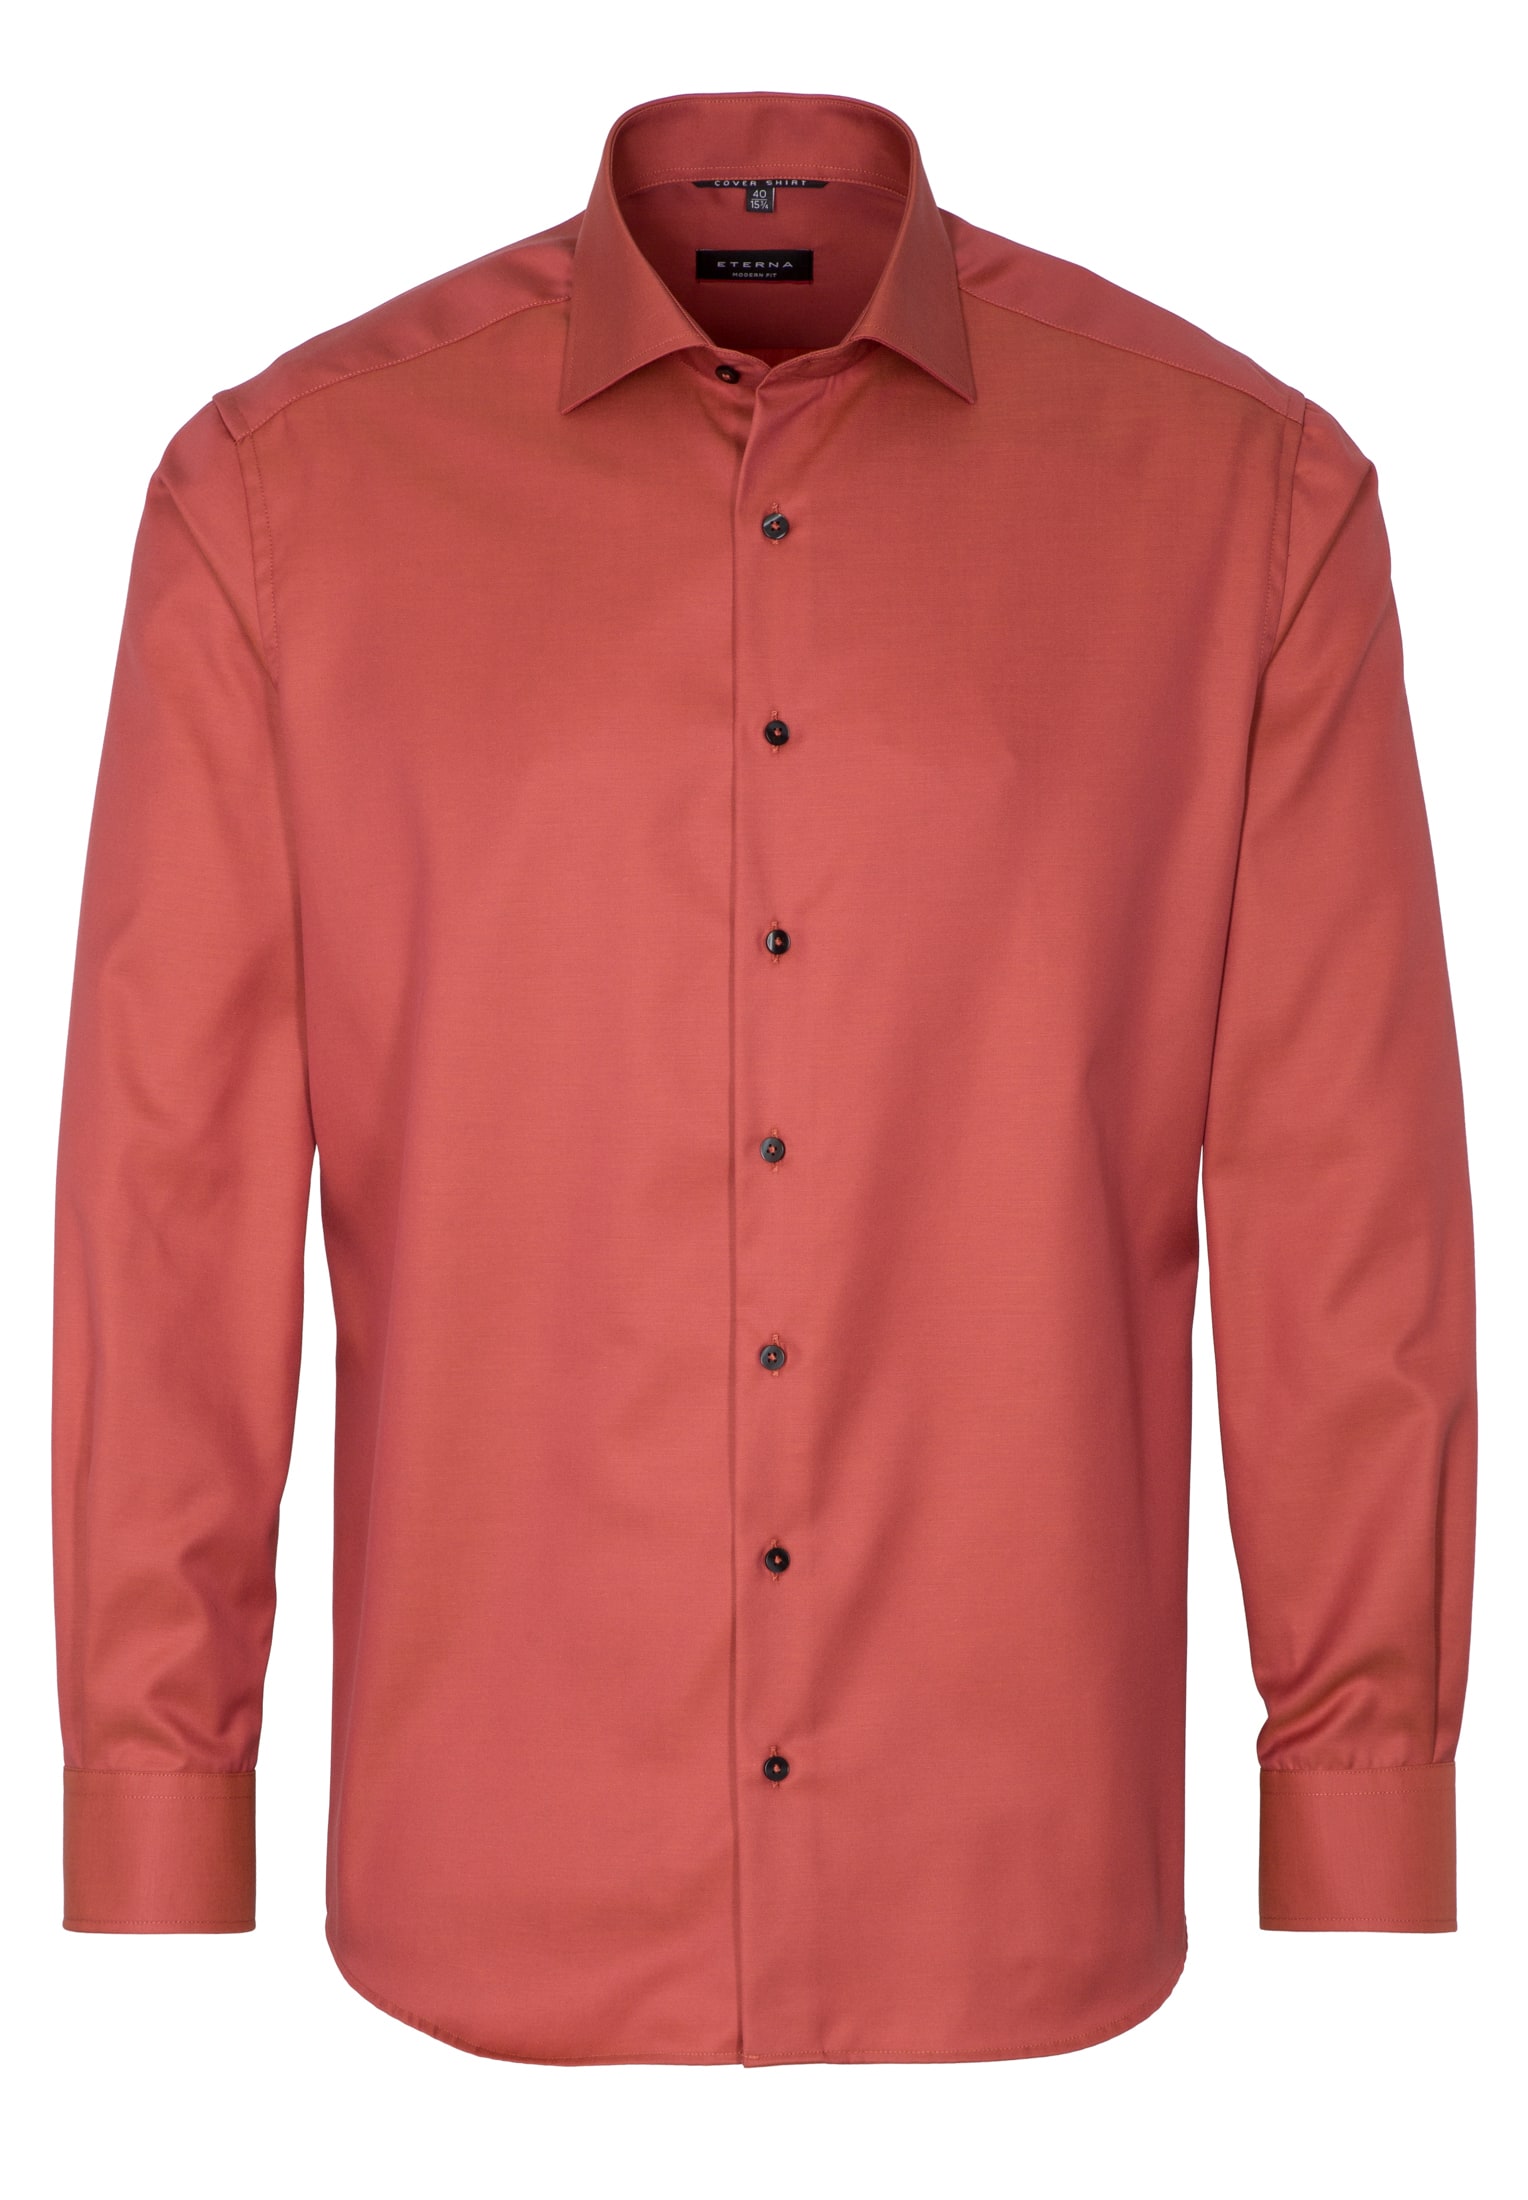 MODERN FIT Cover Shirt in rood vlakte